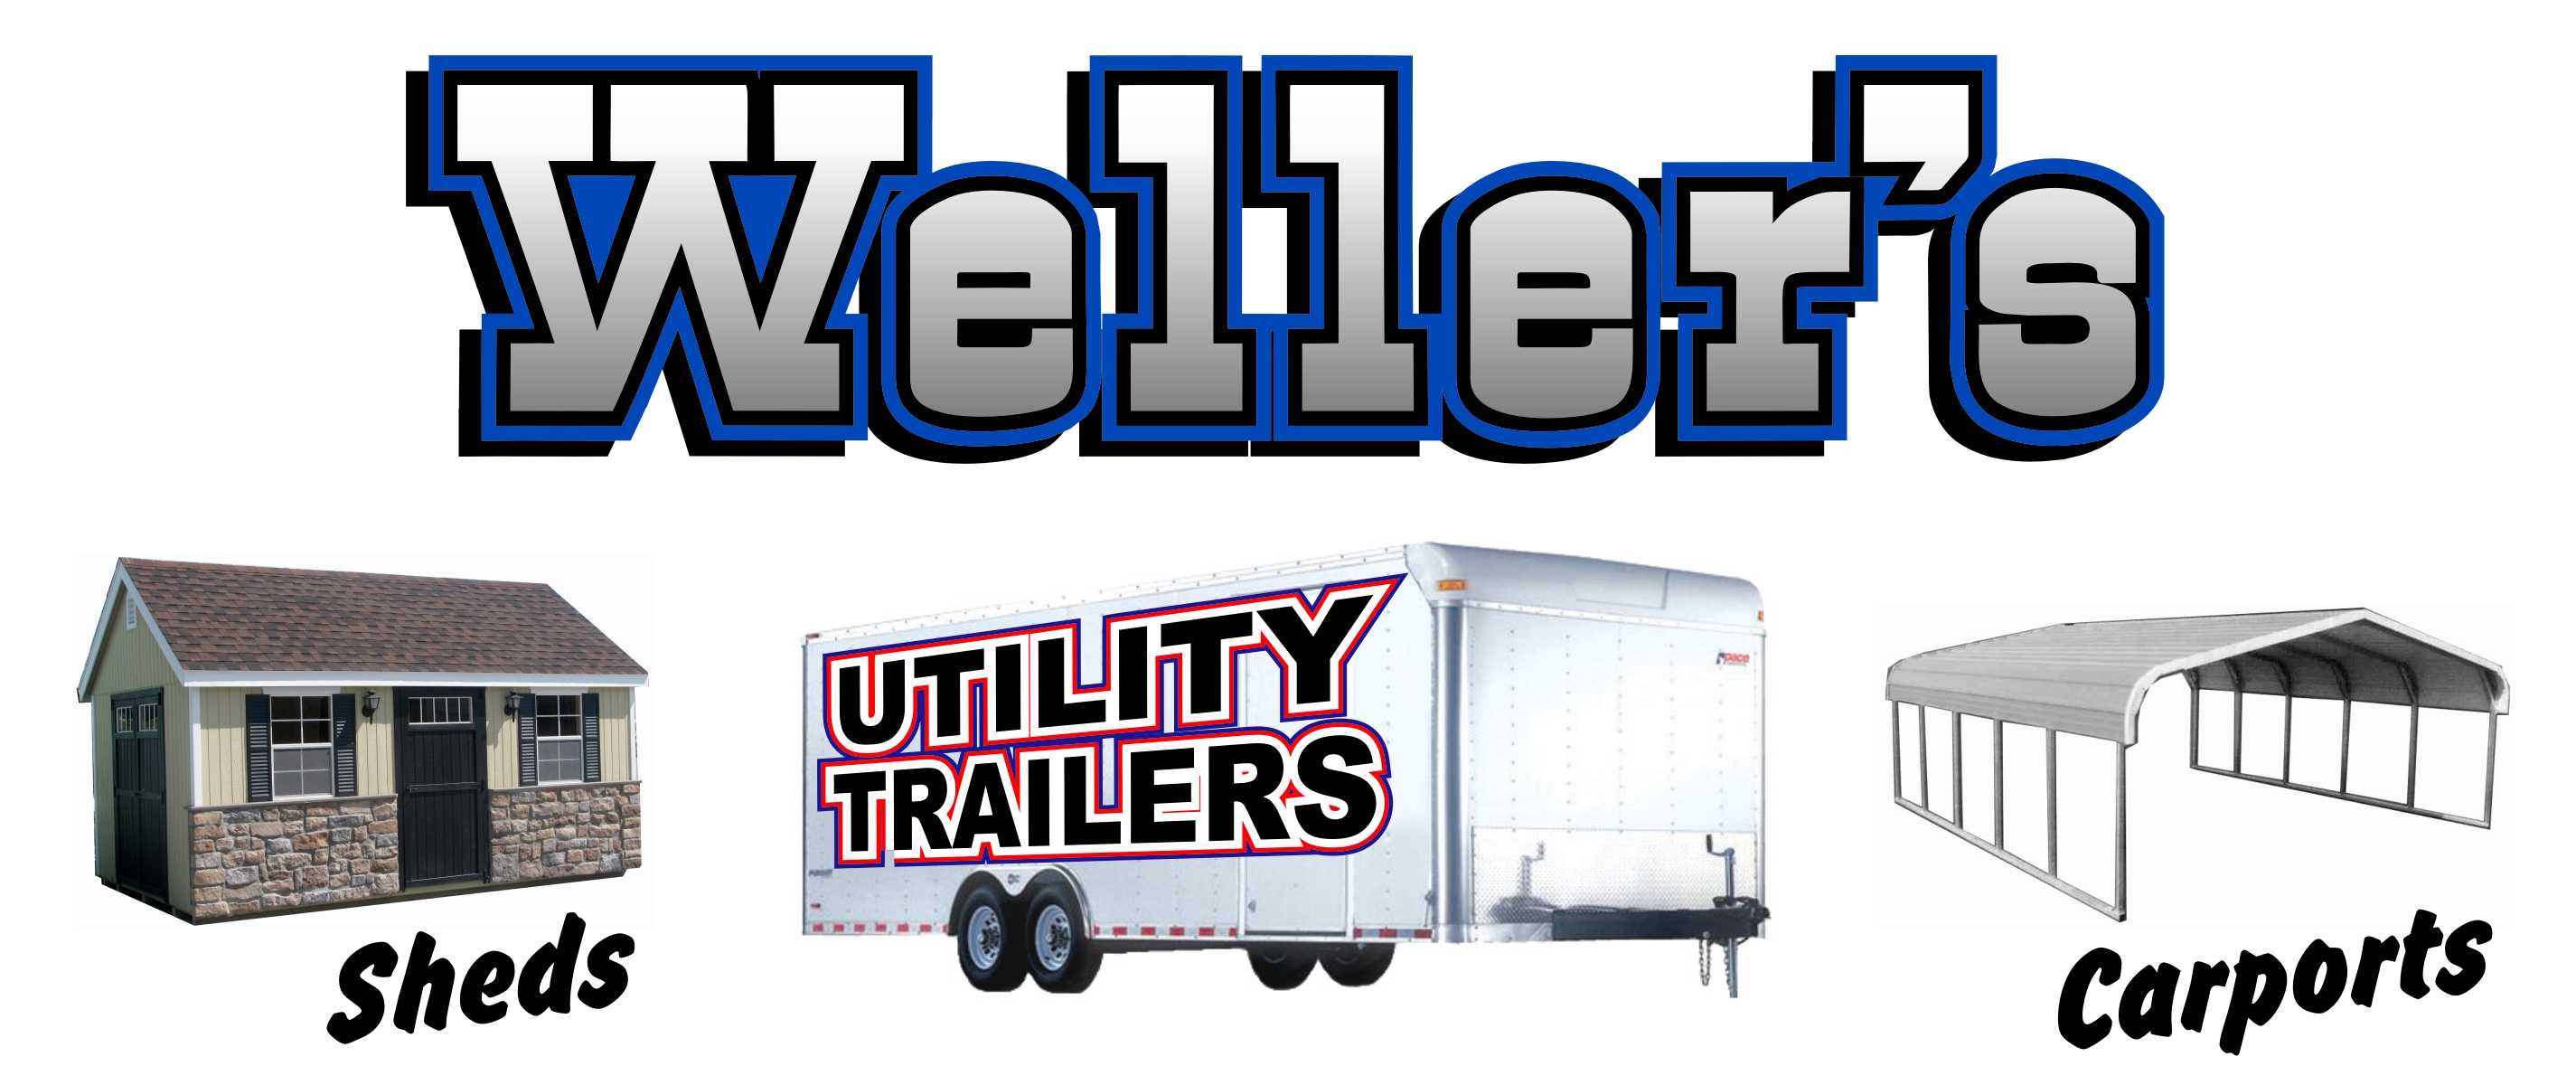 WELLER'S UTILITY TRAILERS